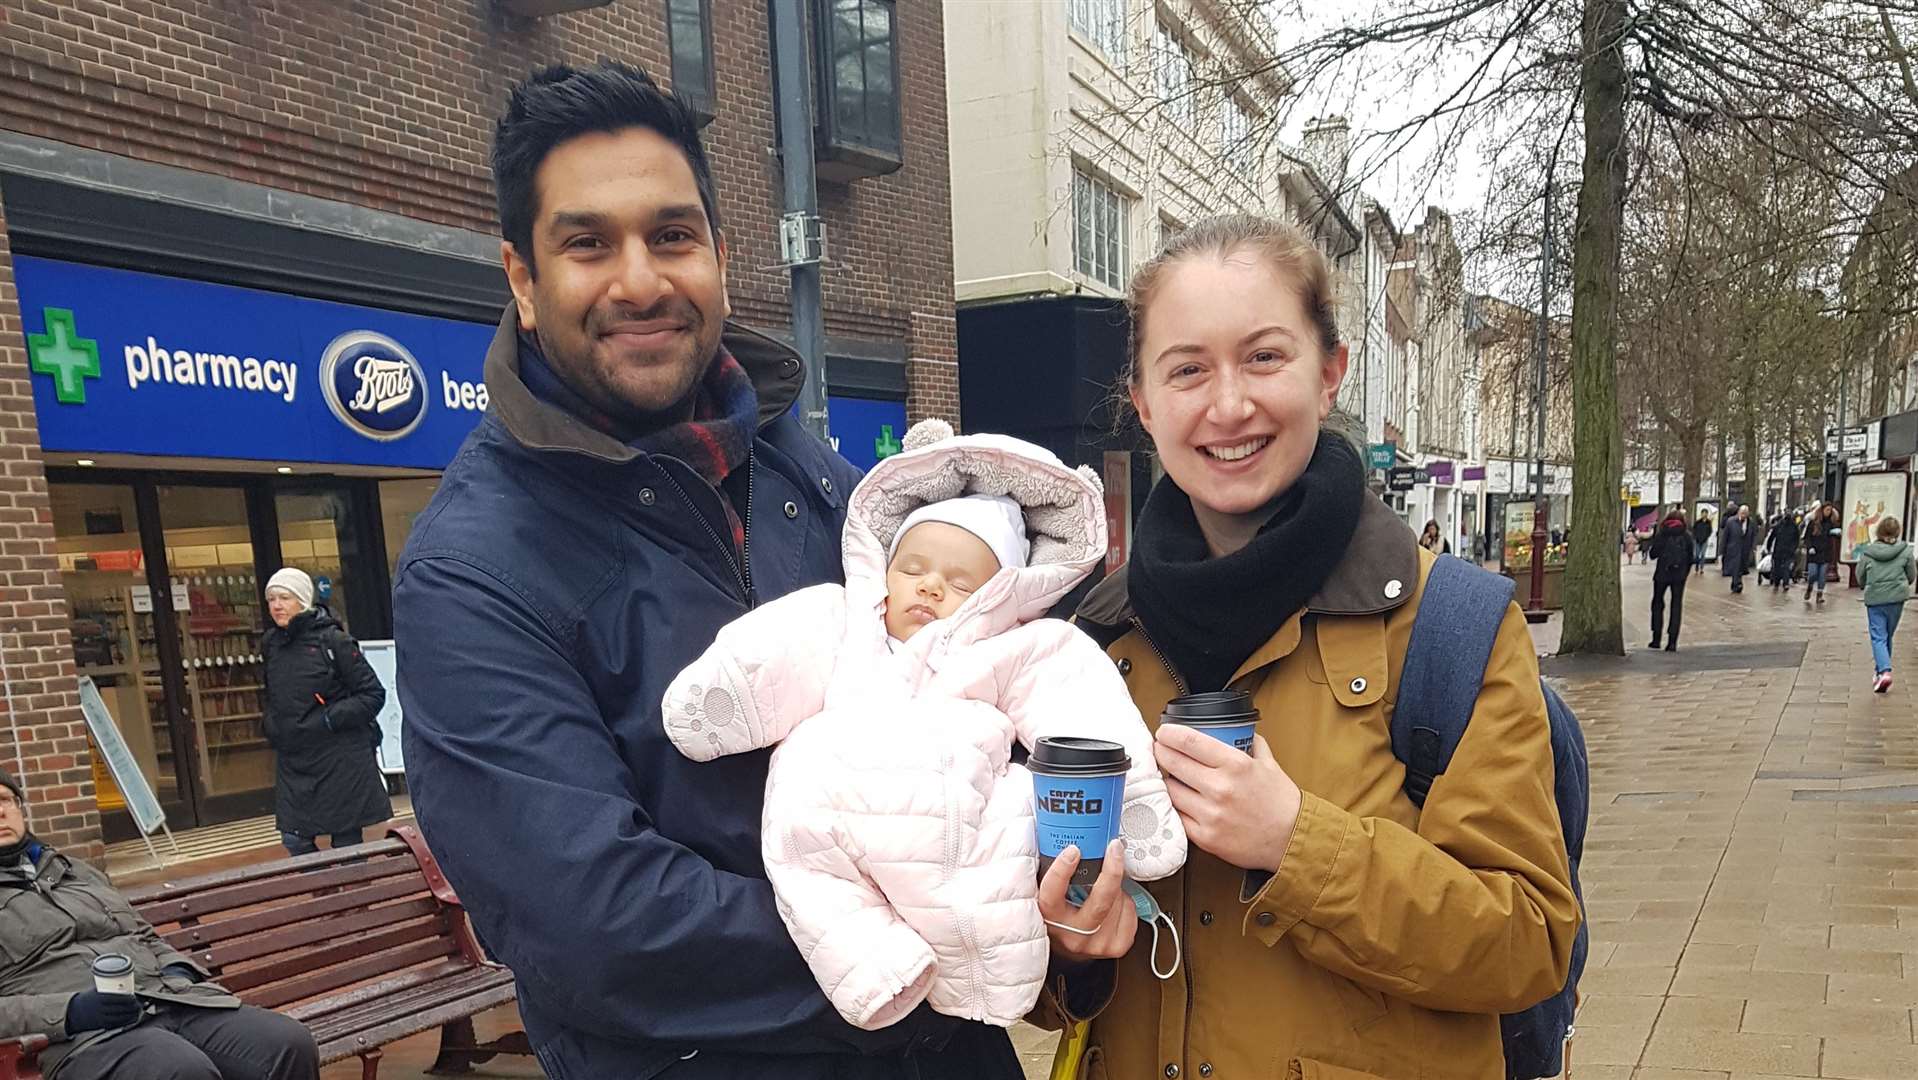 Amit Gupta and Susie Hughes had been to register the birth of baby Ayla